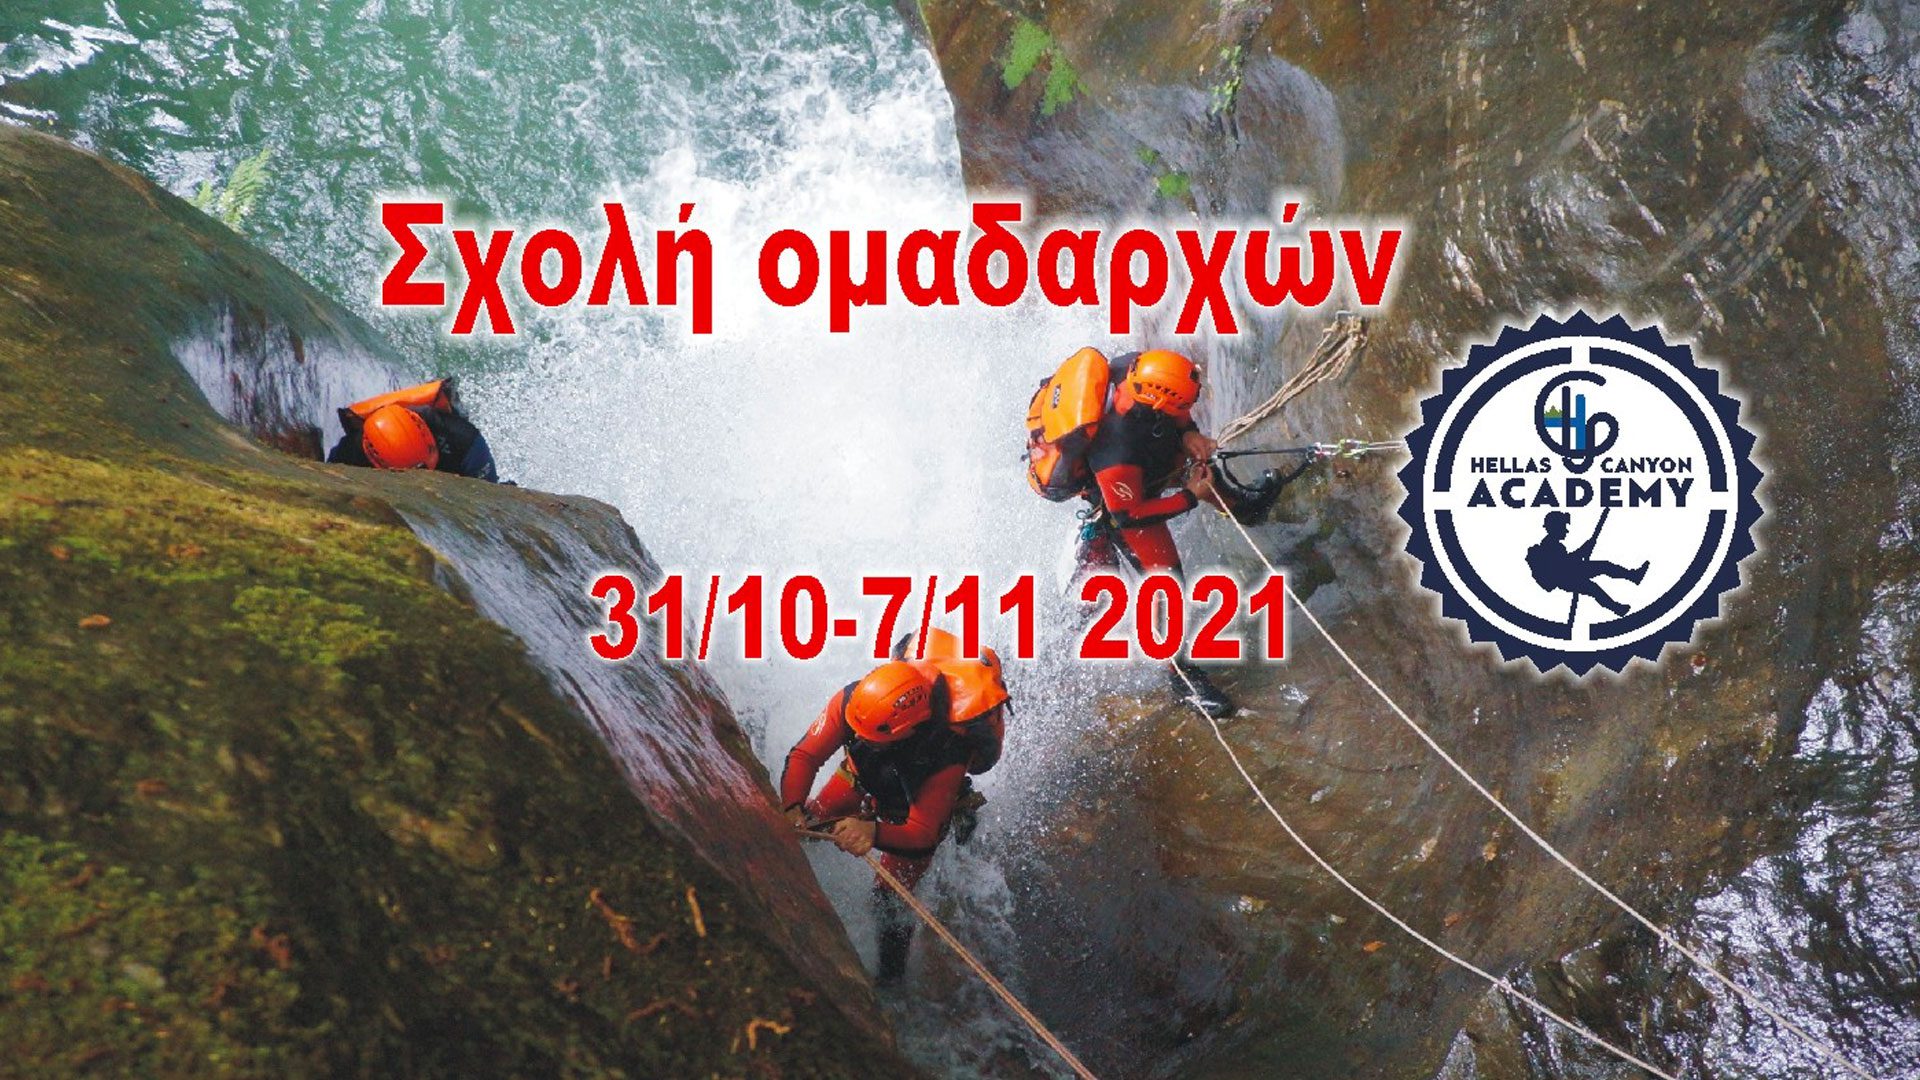 Canyoners participating in an advanced canyoning course